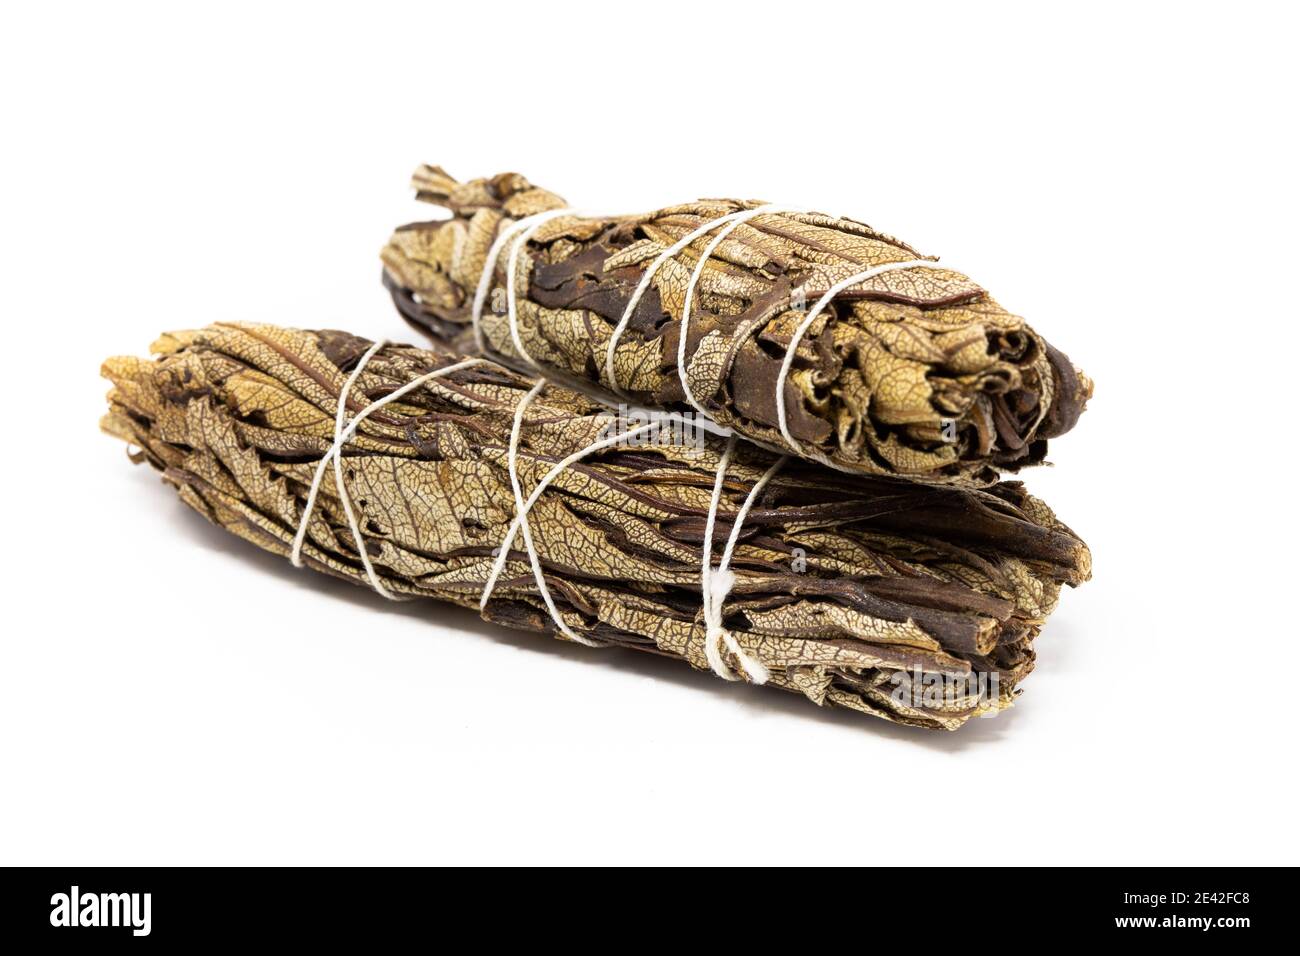 Yerba Santa Sage Smudge Sticks for purification and relaxation close up Stock Photo